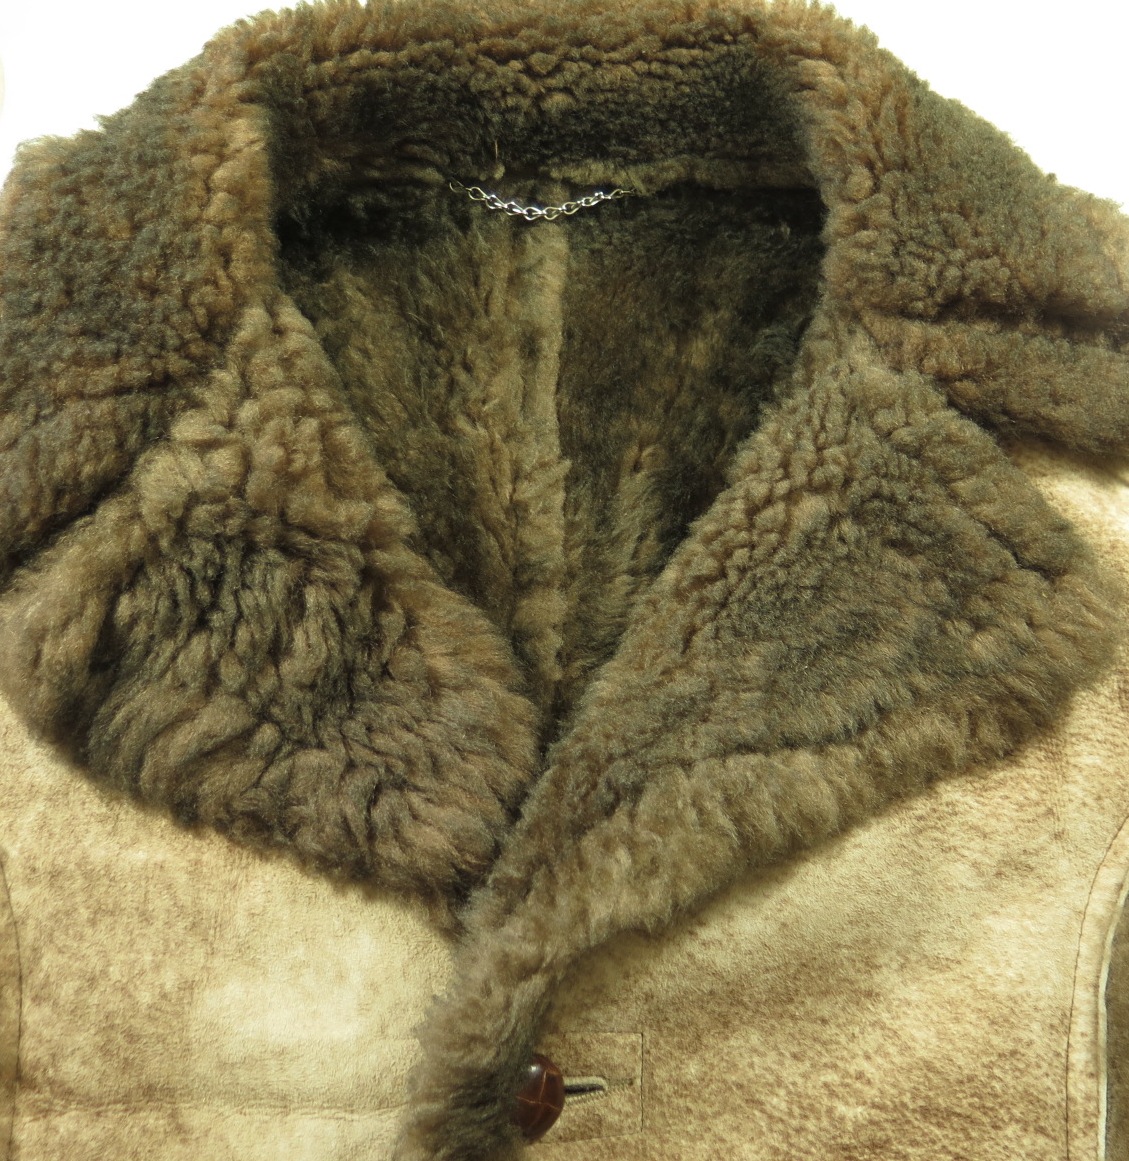 Long Shearling Coat, Authentic & Vintage